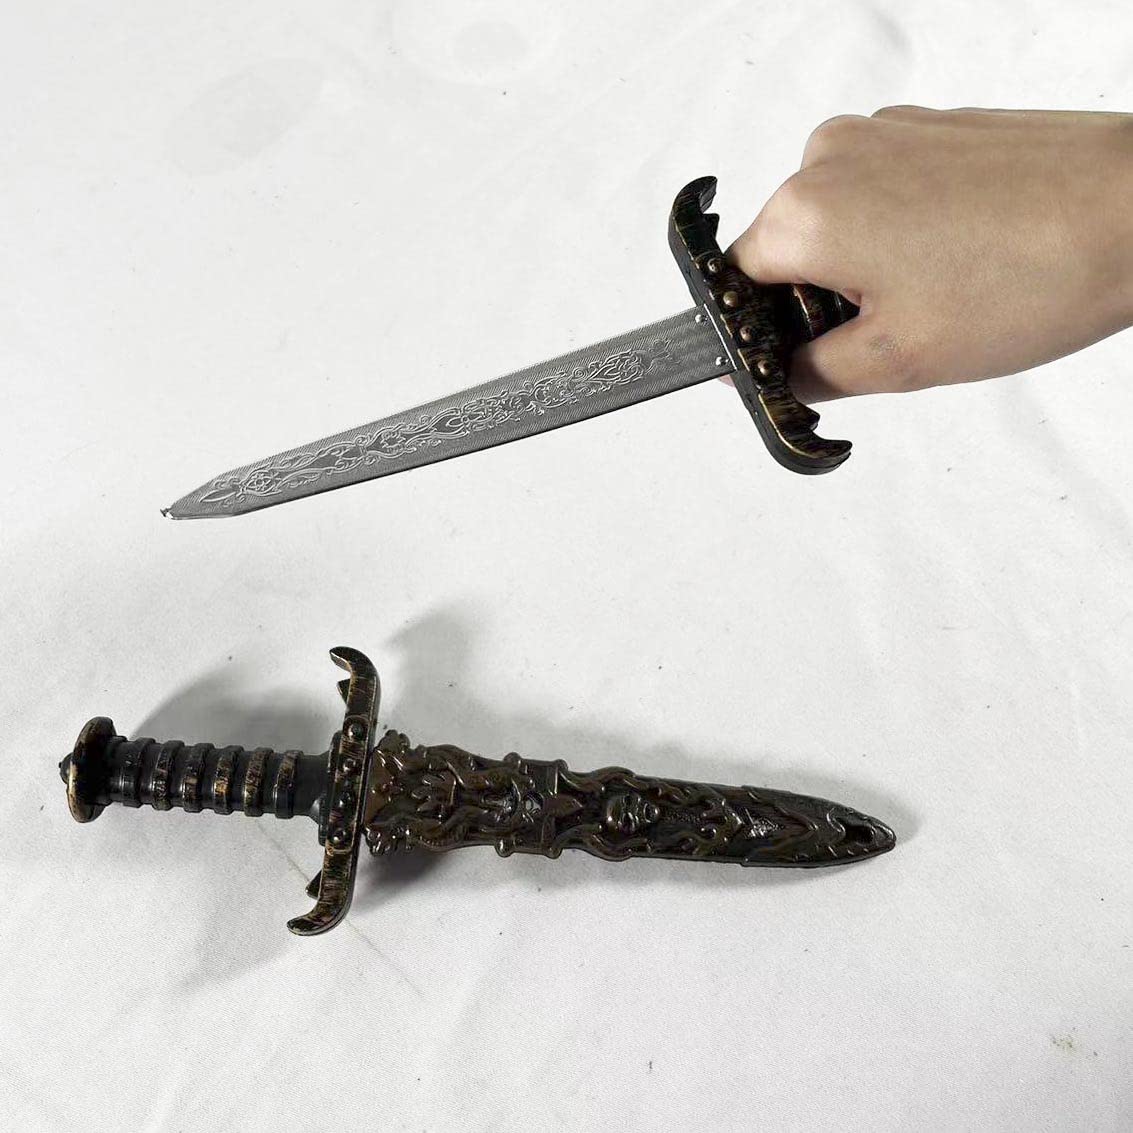 2 Pcs Plastic Dagger Toy Sword Not Sharp Fake Knife Pirate Sword for Pirate Costume Accessories Pirate Party Props